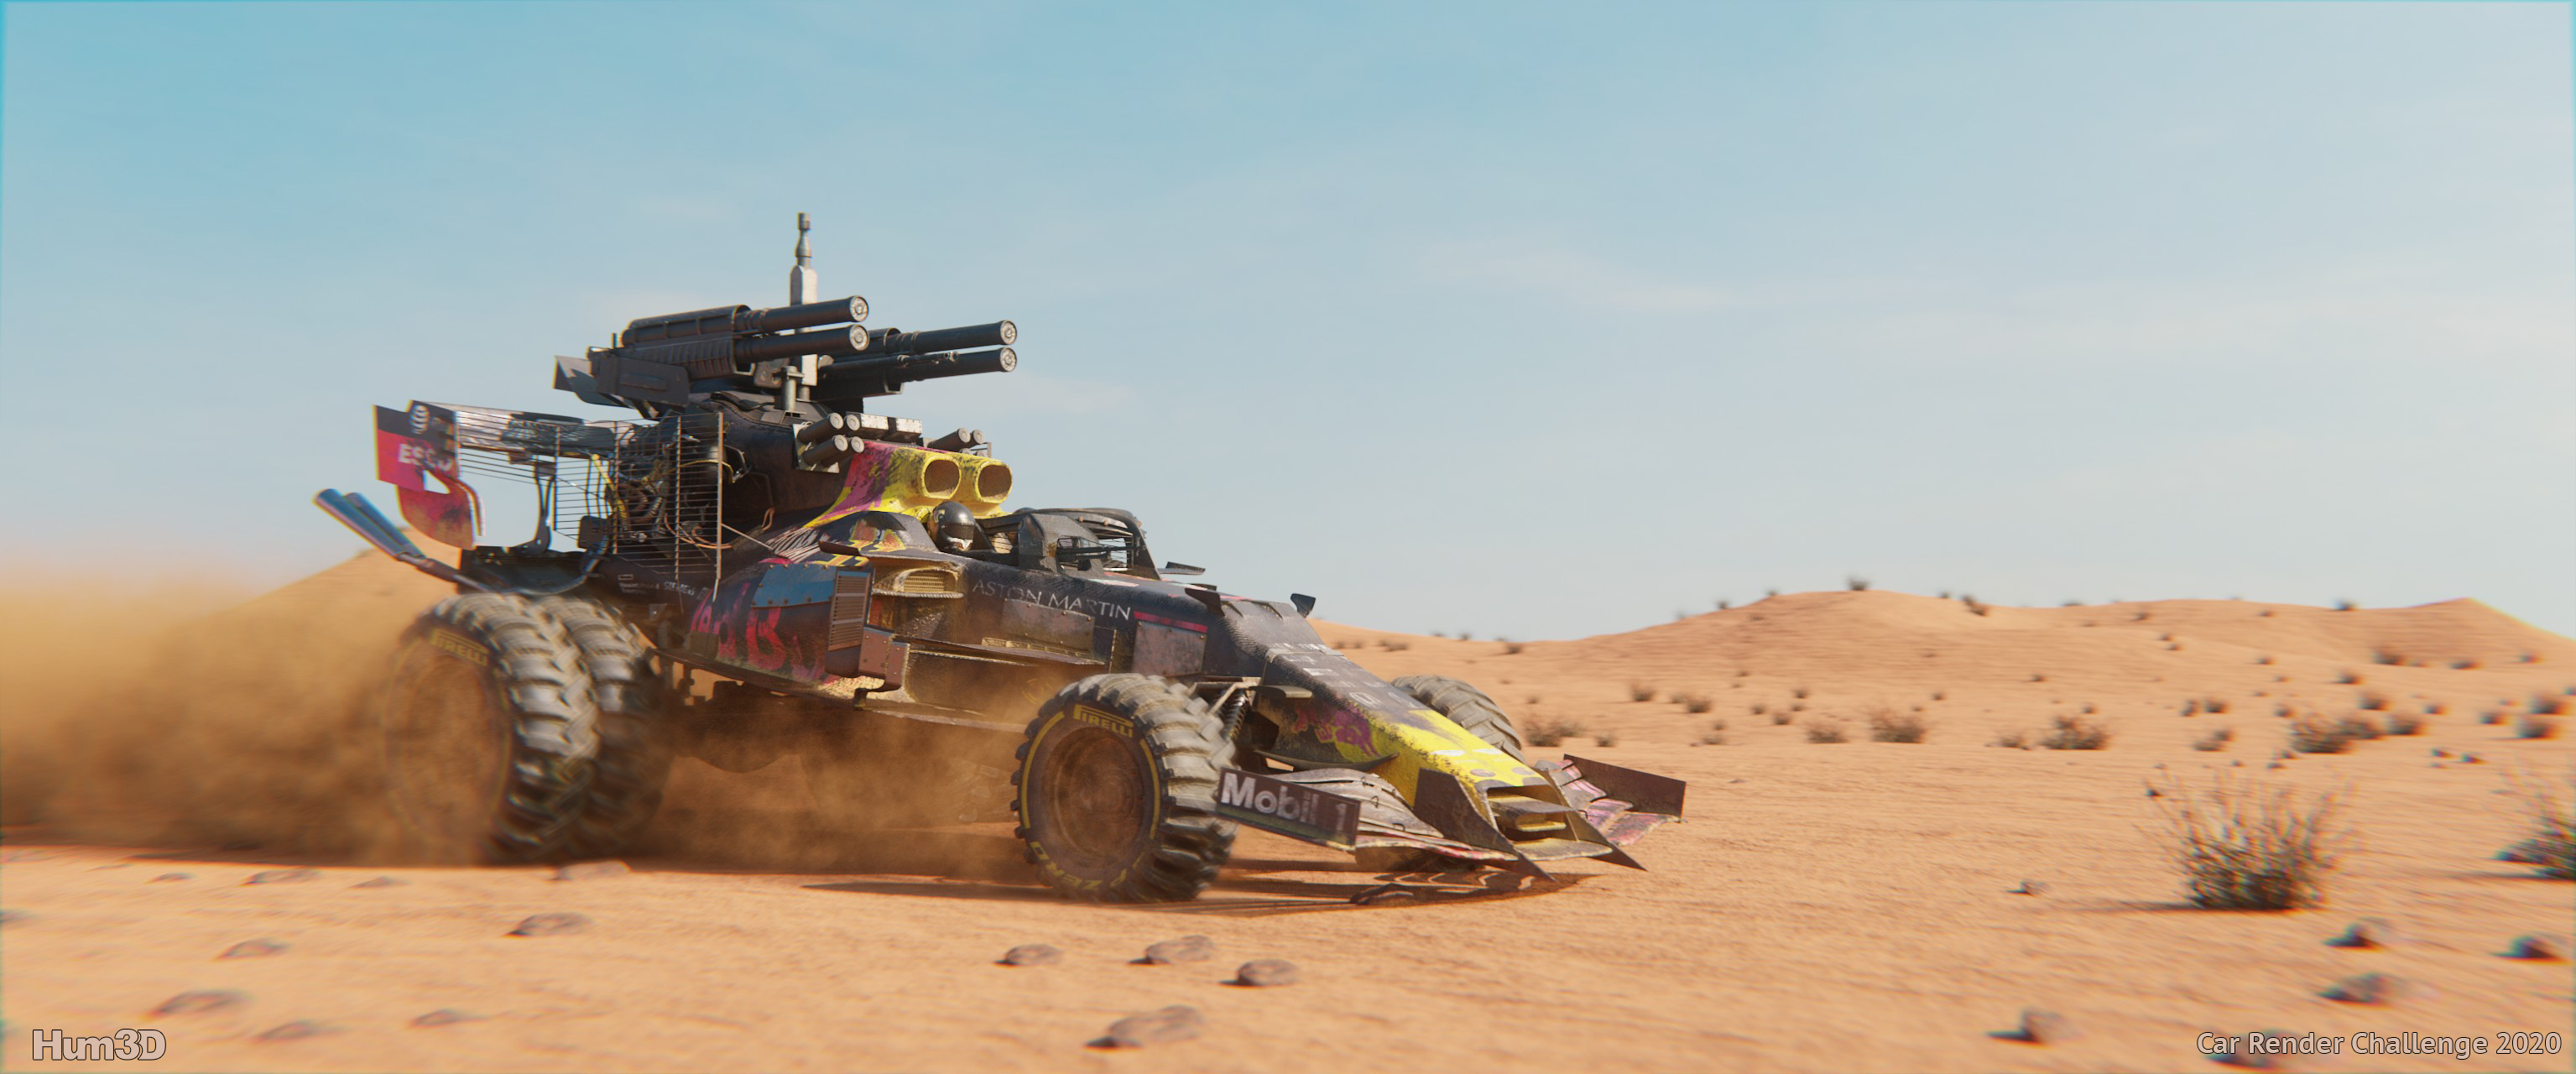 Mad Max F1 by Christoph